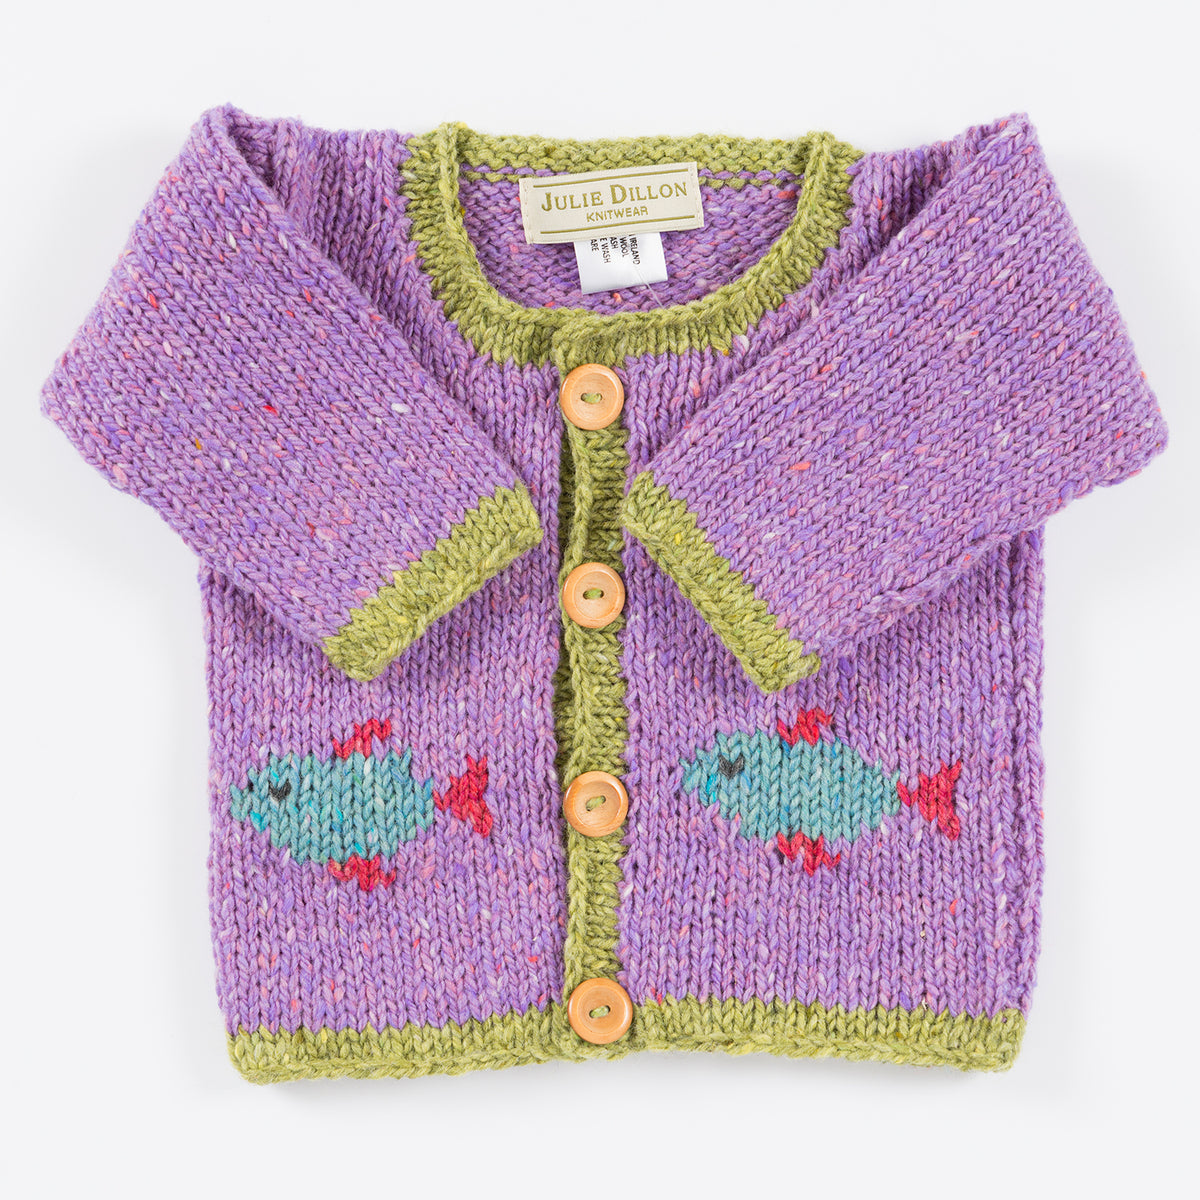 Handknitted Baby Cardigan - Lilac with Fish motif